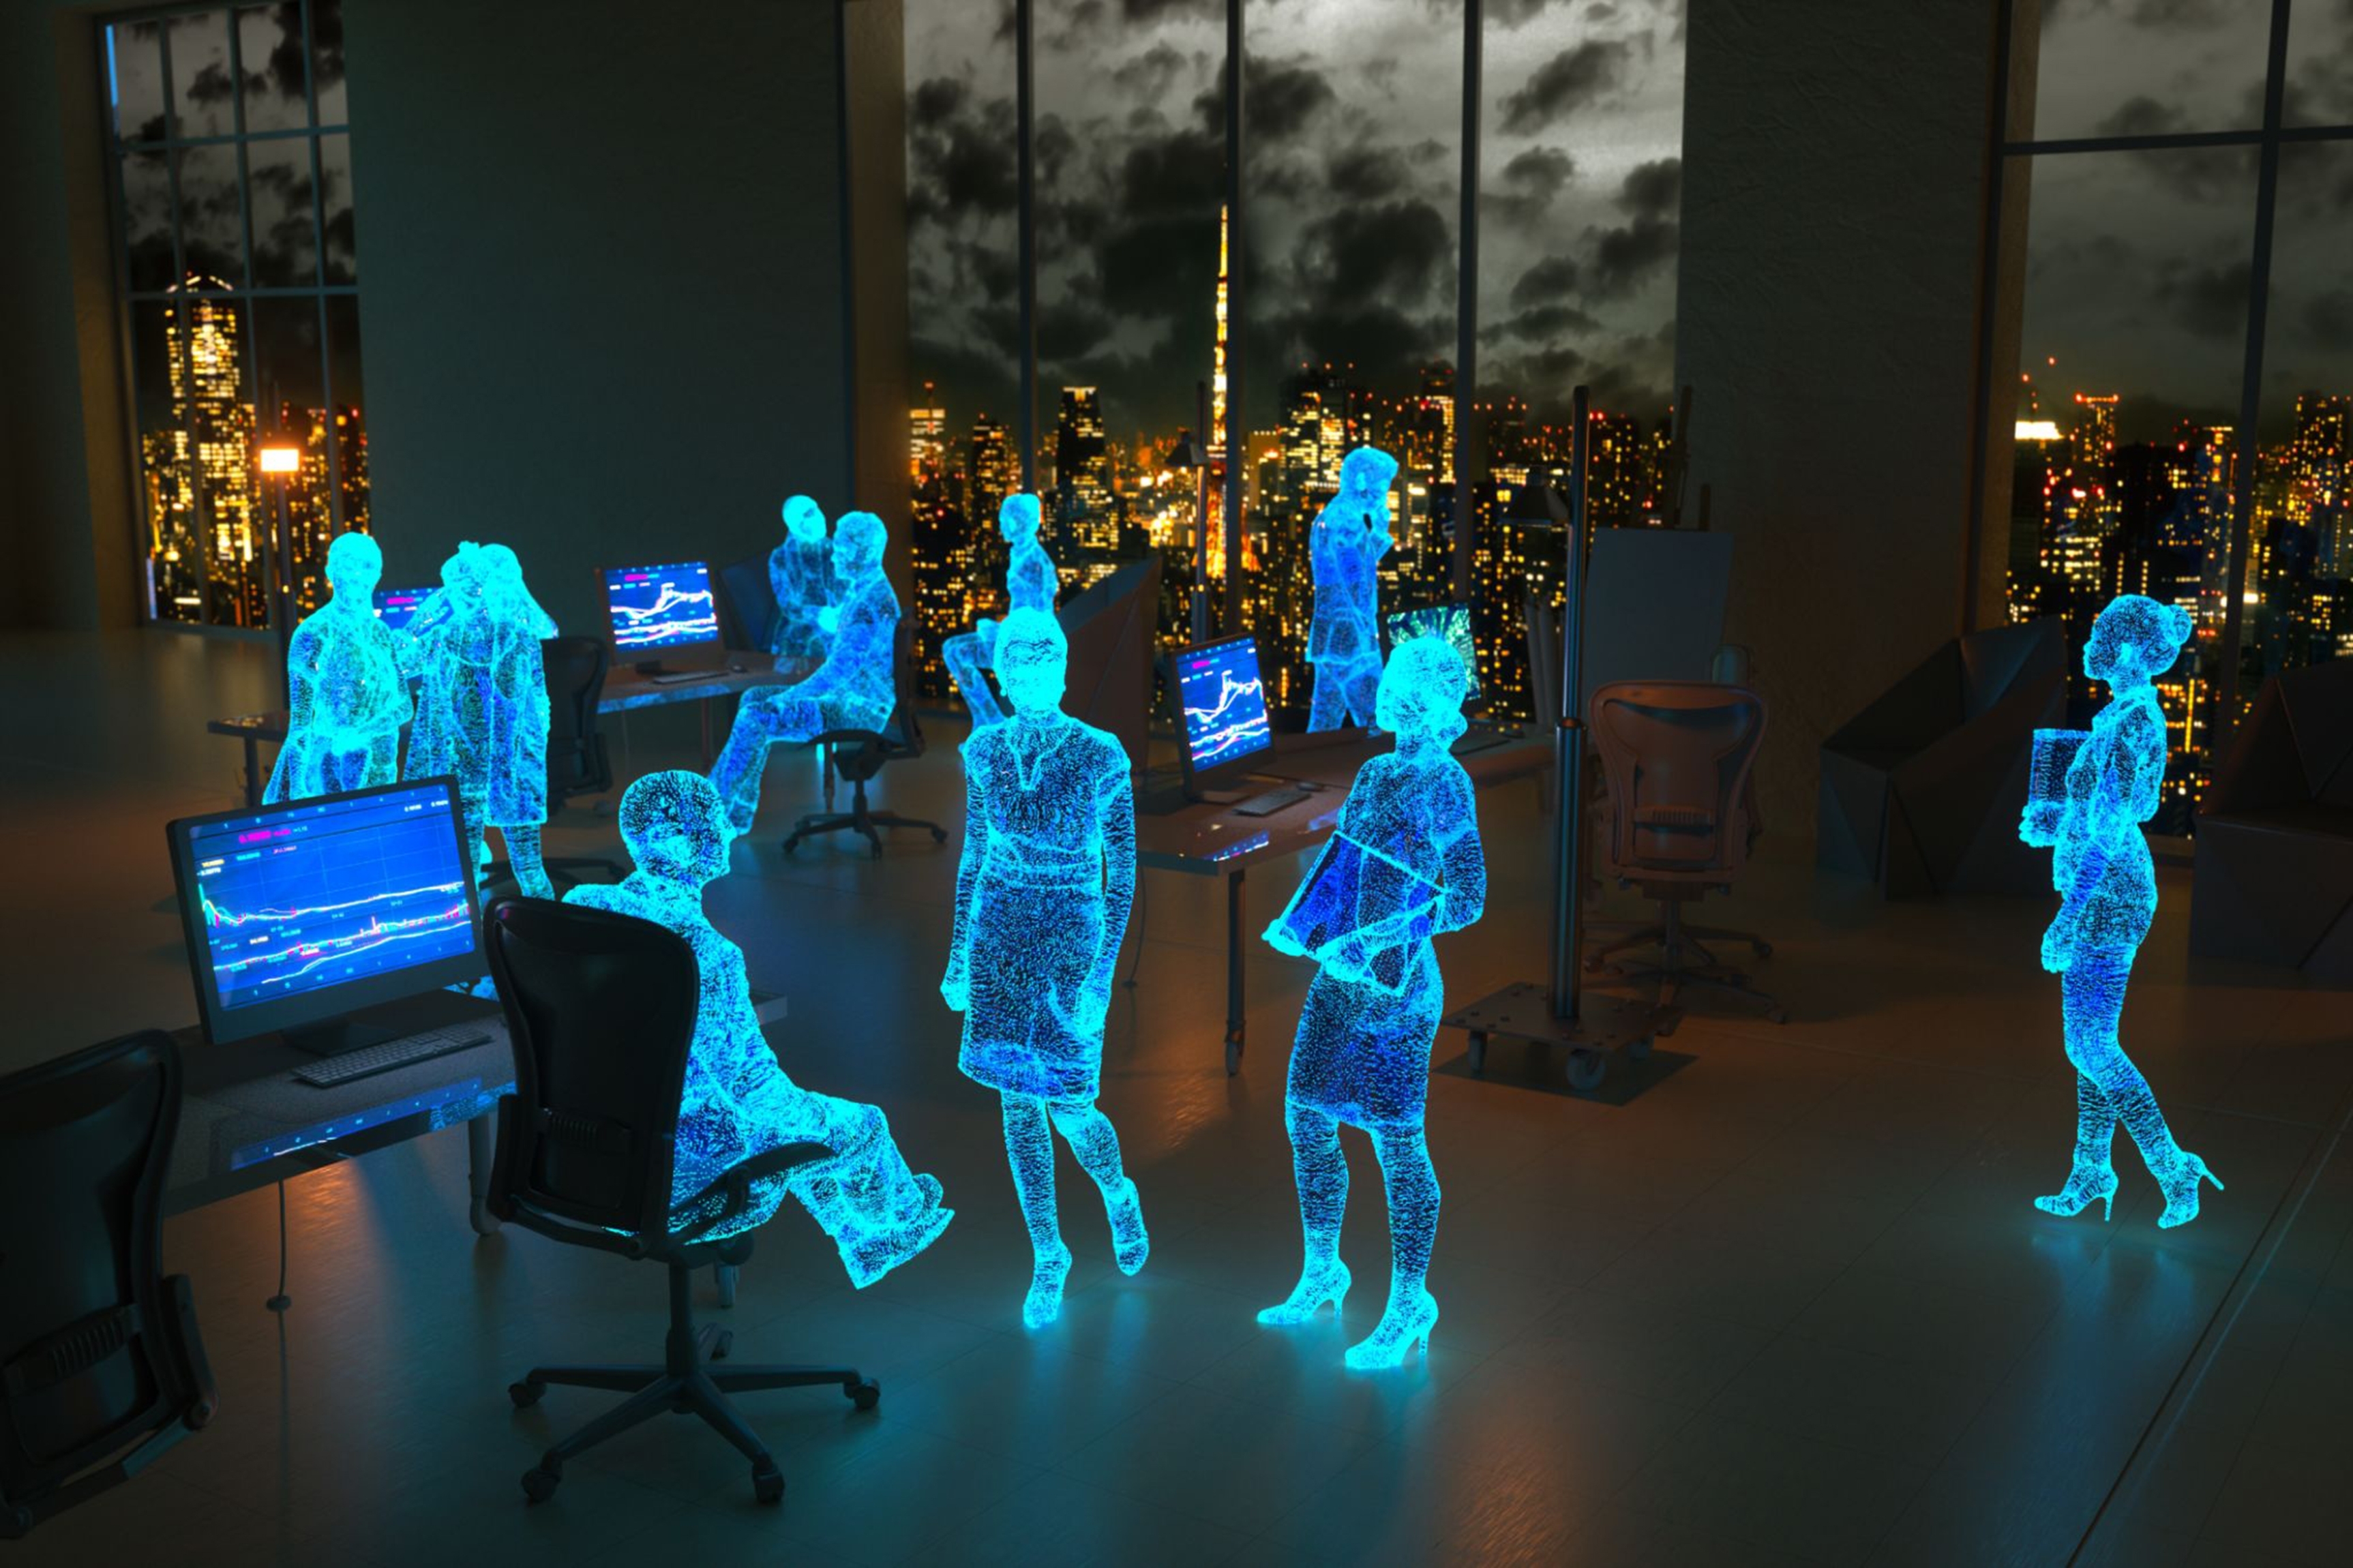 Enter the Metaverse: How tech will facilitate the workspace of the future